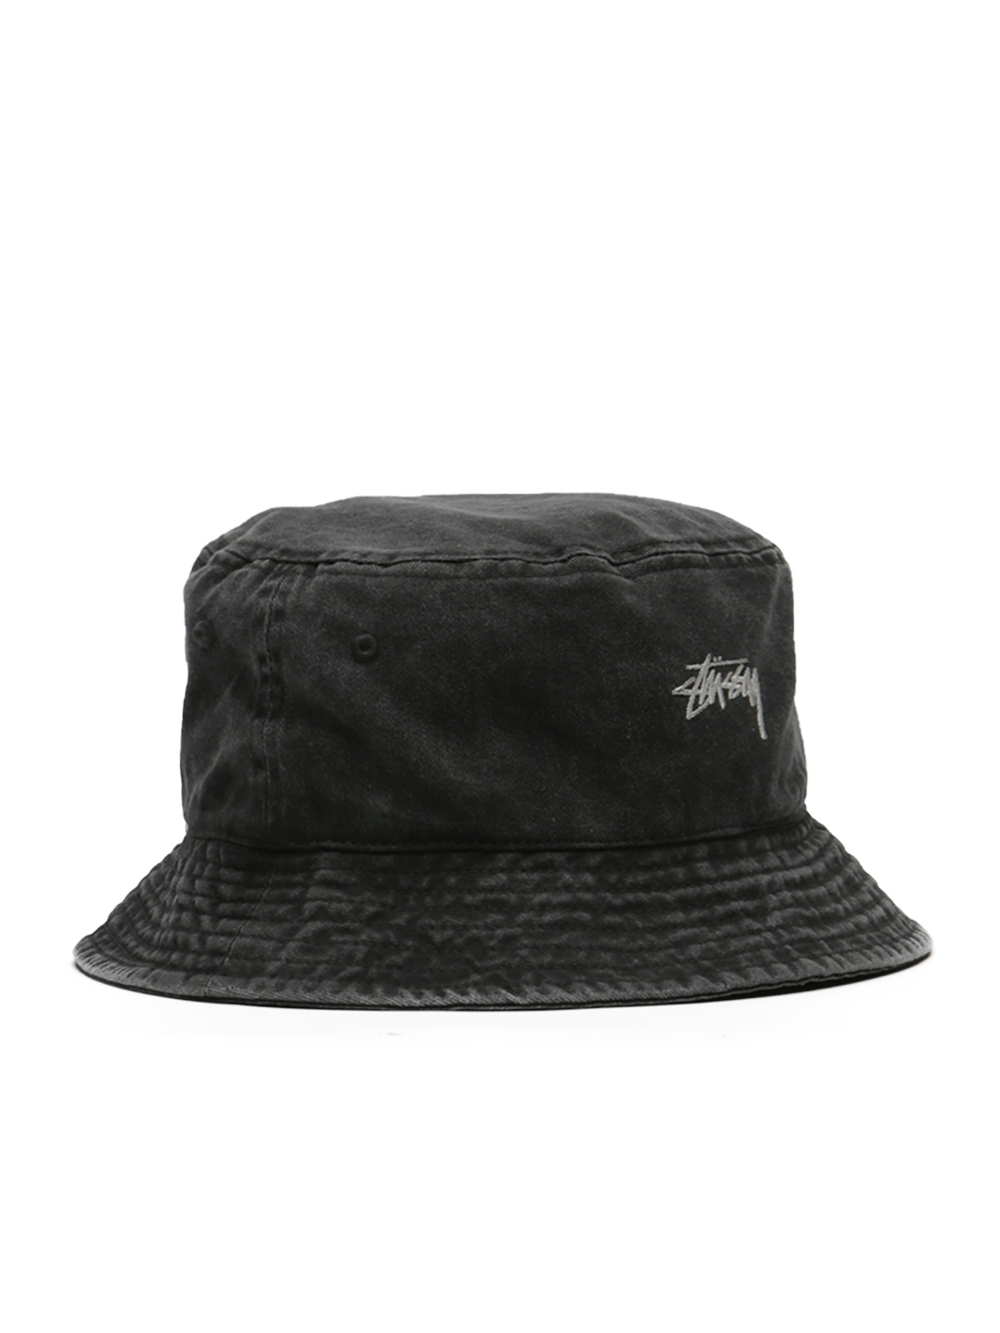 Панама Washed Stock Bucket Hat